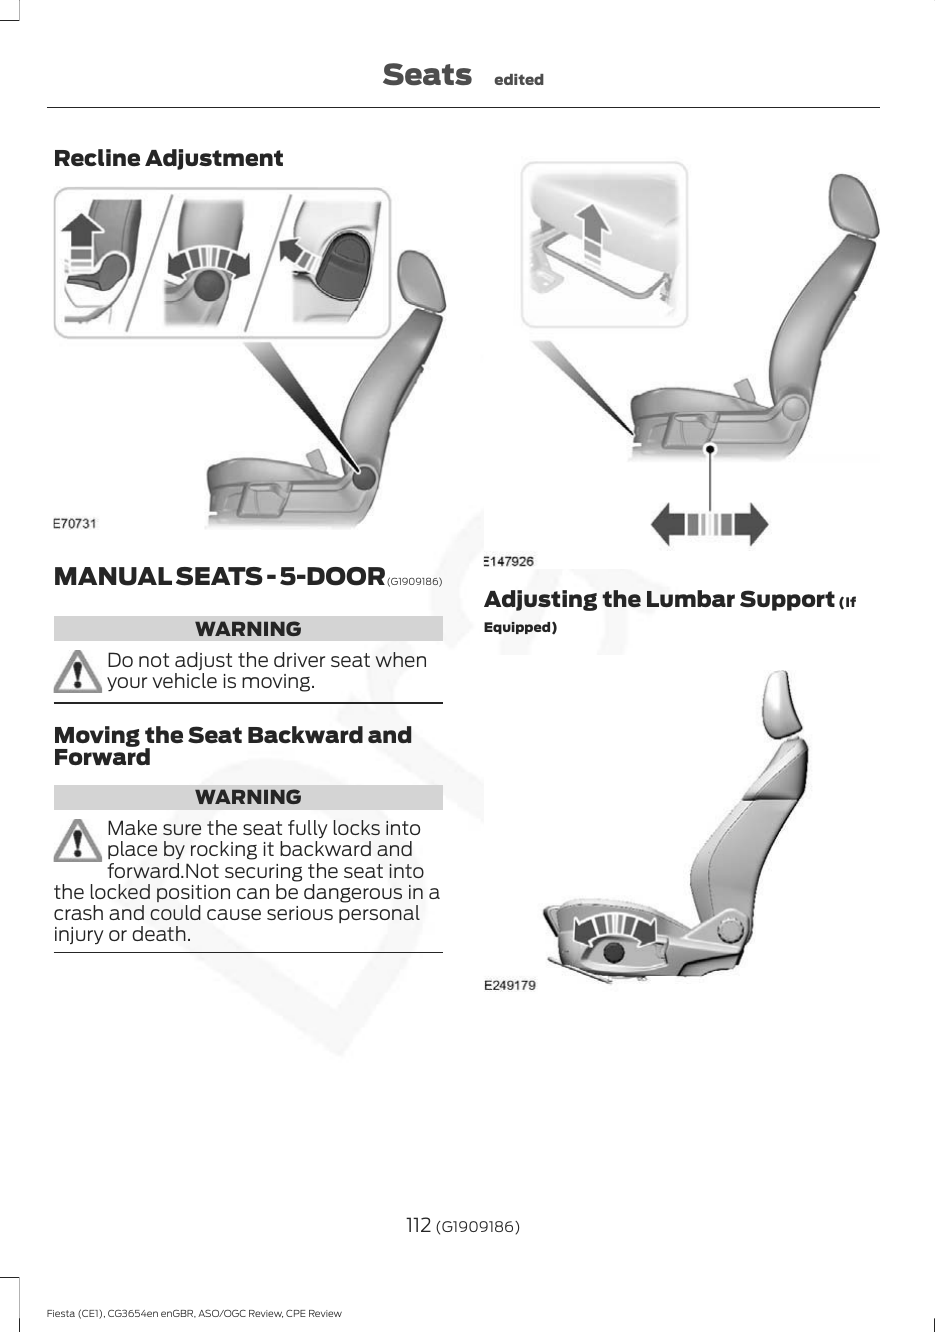 Recline AdjustmentMANUAL SEATS - 5-DOOR (G1909186)WARNINGDo not adjust the driver seat whenyour vehicle is moving.Moving the Seat Backward andForwardWARNINGMake sure the seat fully locks intoplace by rocking it backward andforward.Not securing the seat intothe locked position can be dangerous in acrash and could cause serious personalinjury or death.Adjusting the Lumbar Support (IfEquipped)112 (G1909186)Fiesta (CE1), CG3654en enGBR, ASO/OGC Review, CPE ReviewSeats edited